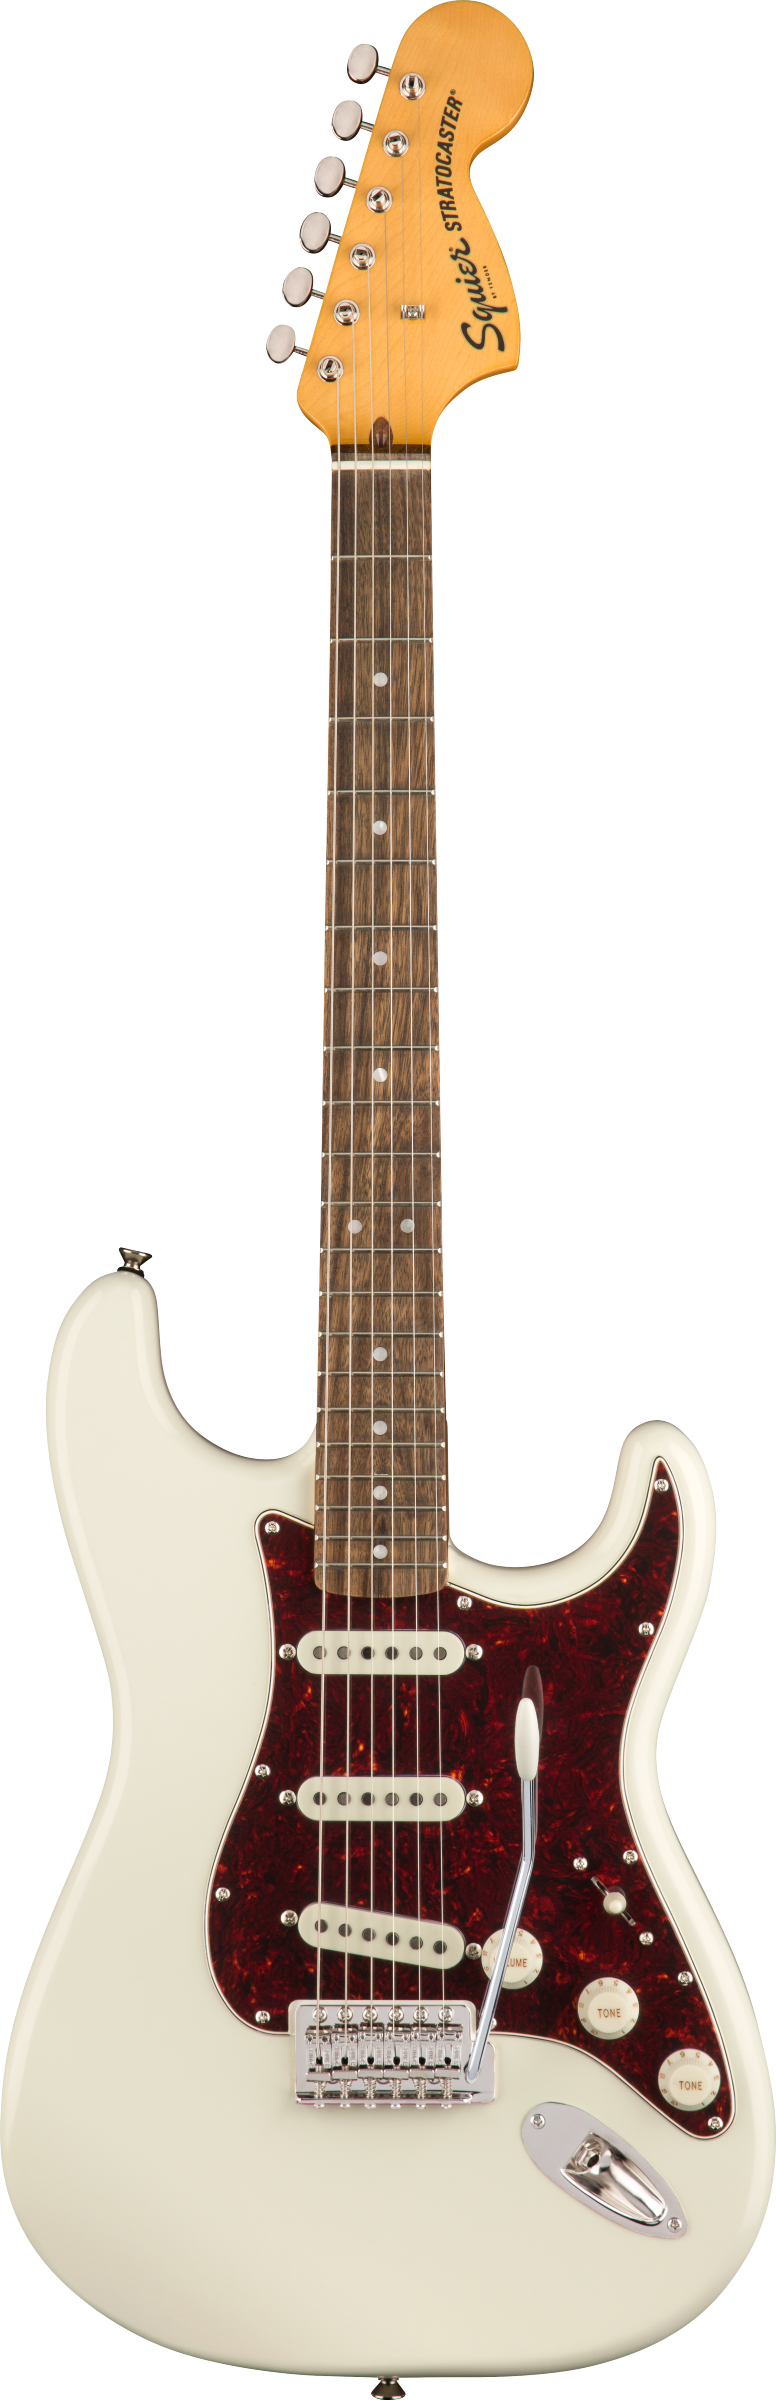 Squier Classic Vibe 60s Stratocaster Electric Guitar - Olympic White - Joondalup Music Centre